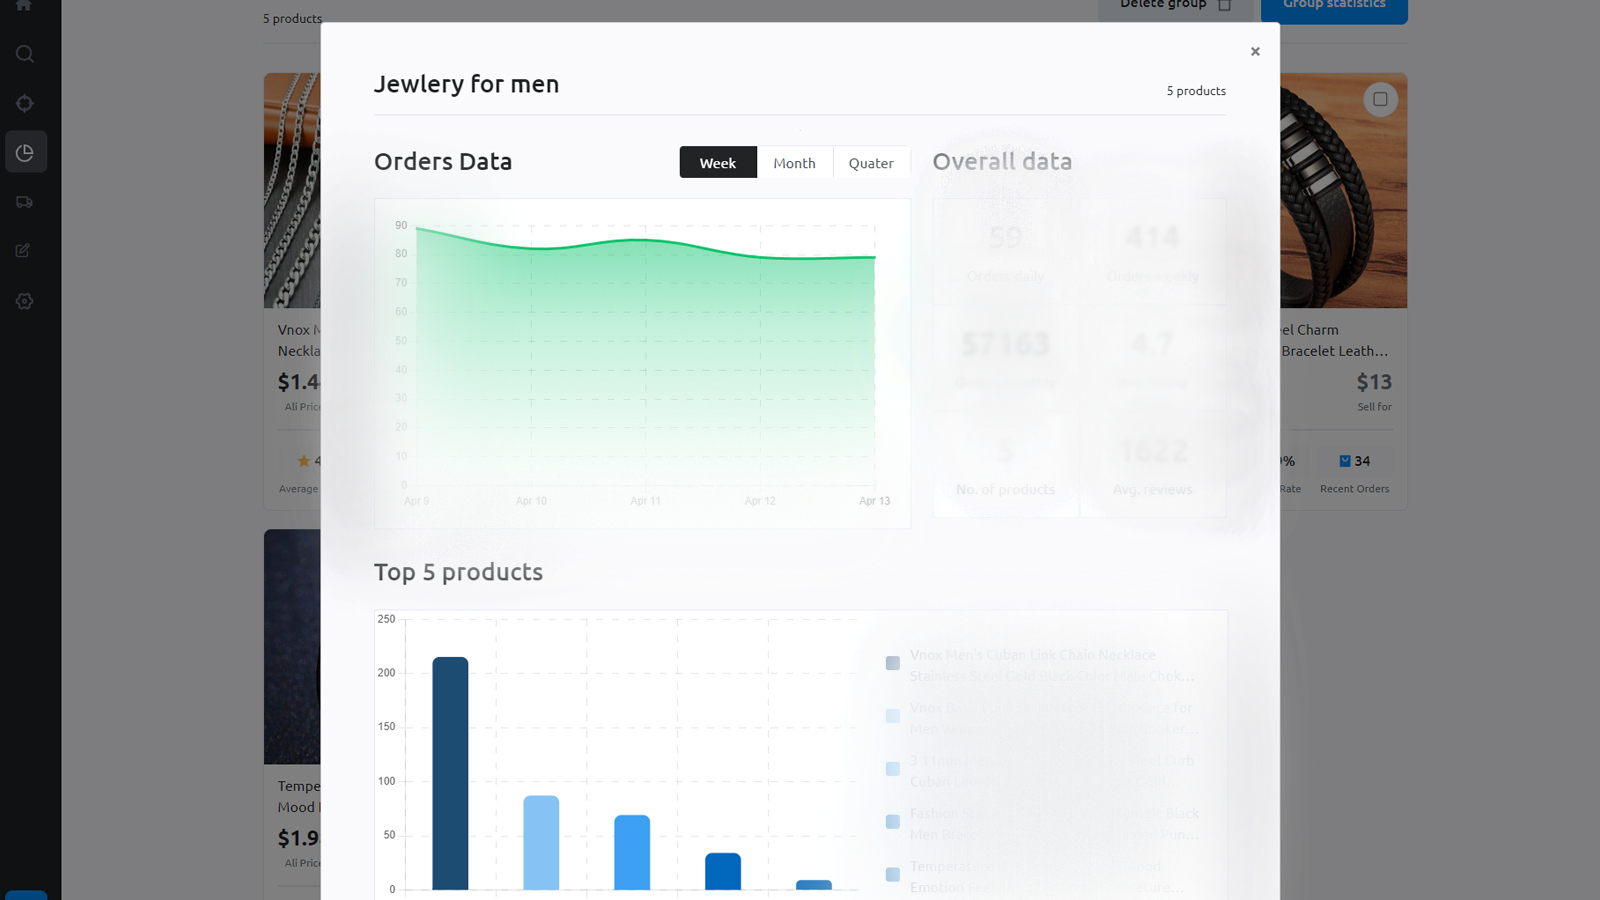 Group statistics view to compare products against each other